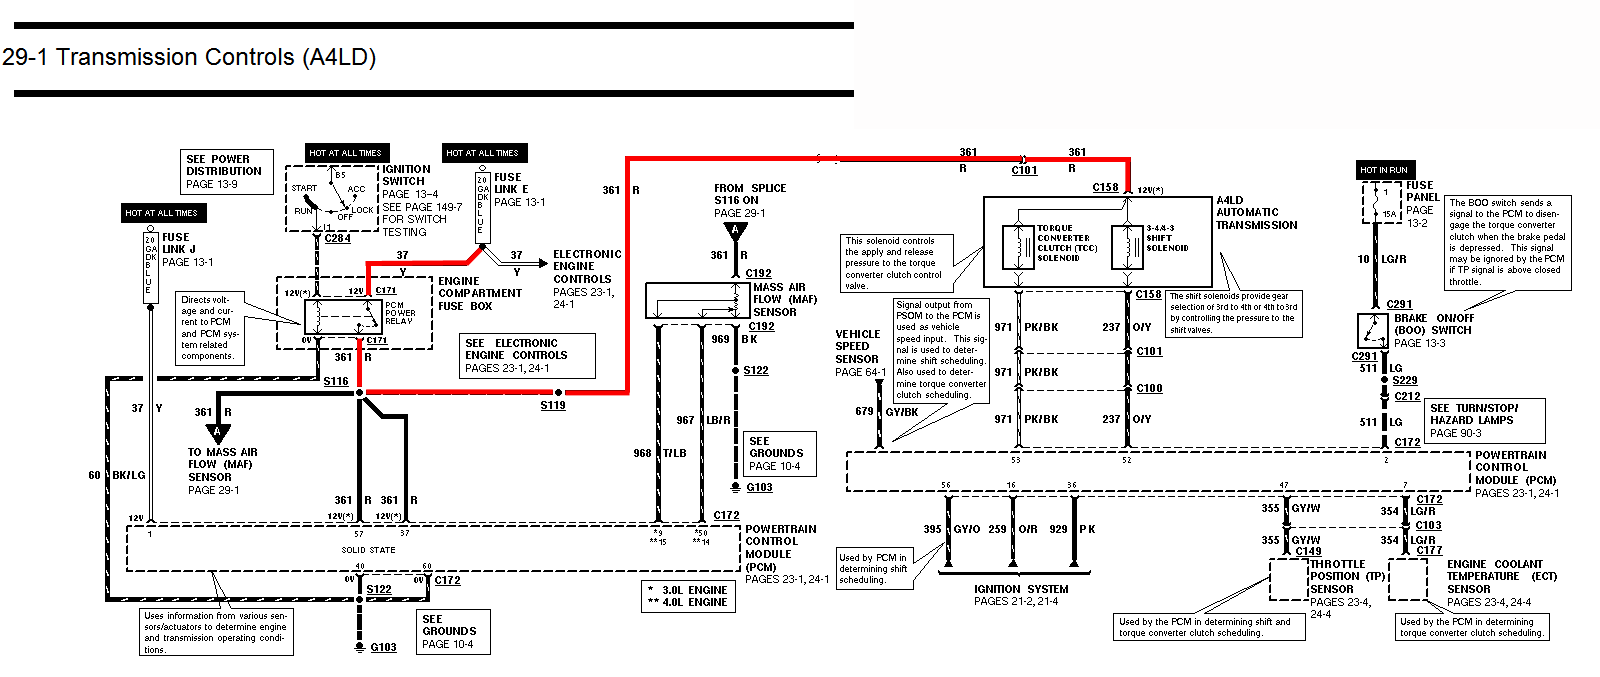 97 Mustang Gt Headlight Wiring Diagram from asavage.dyndns.org